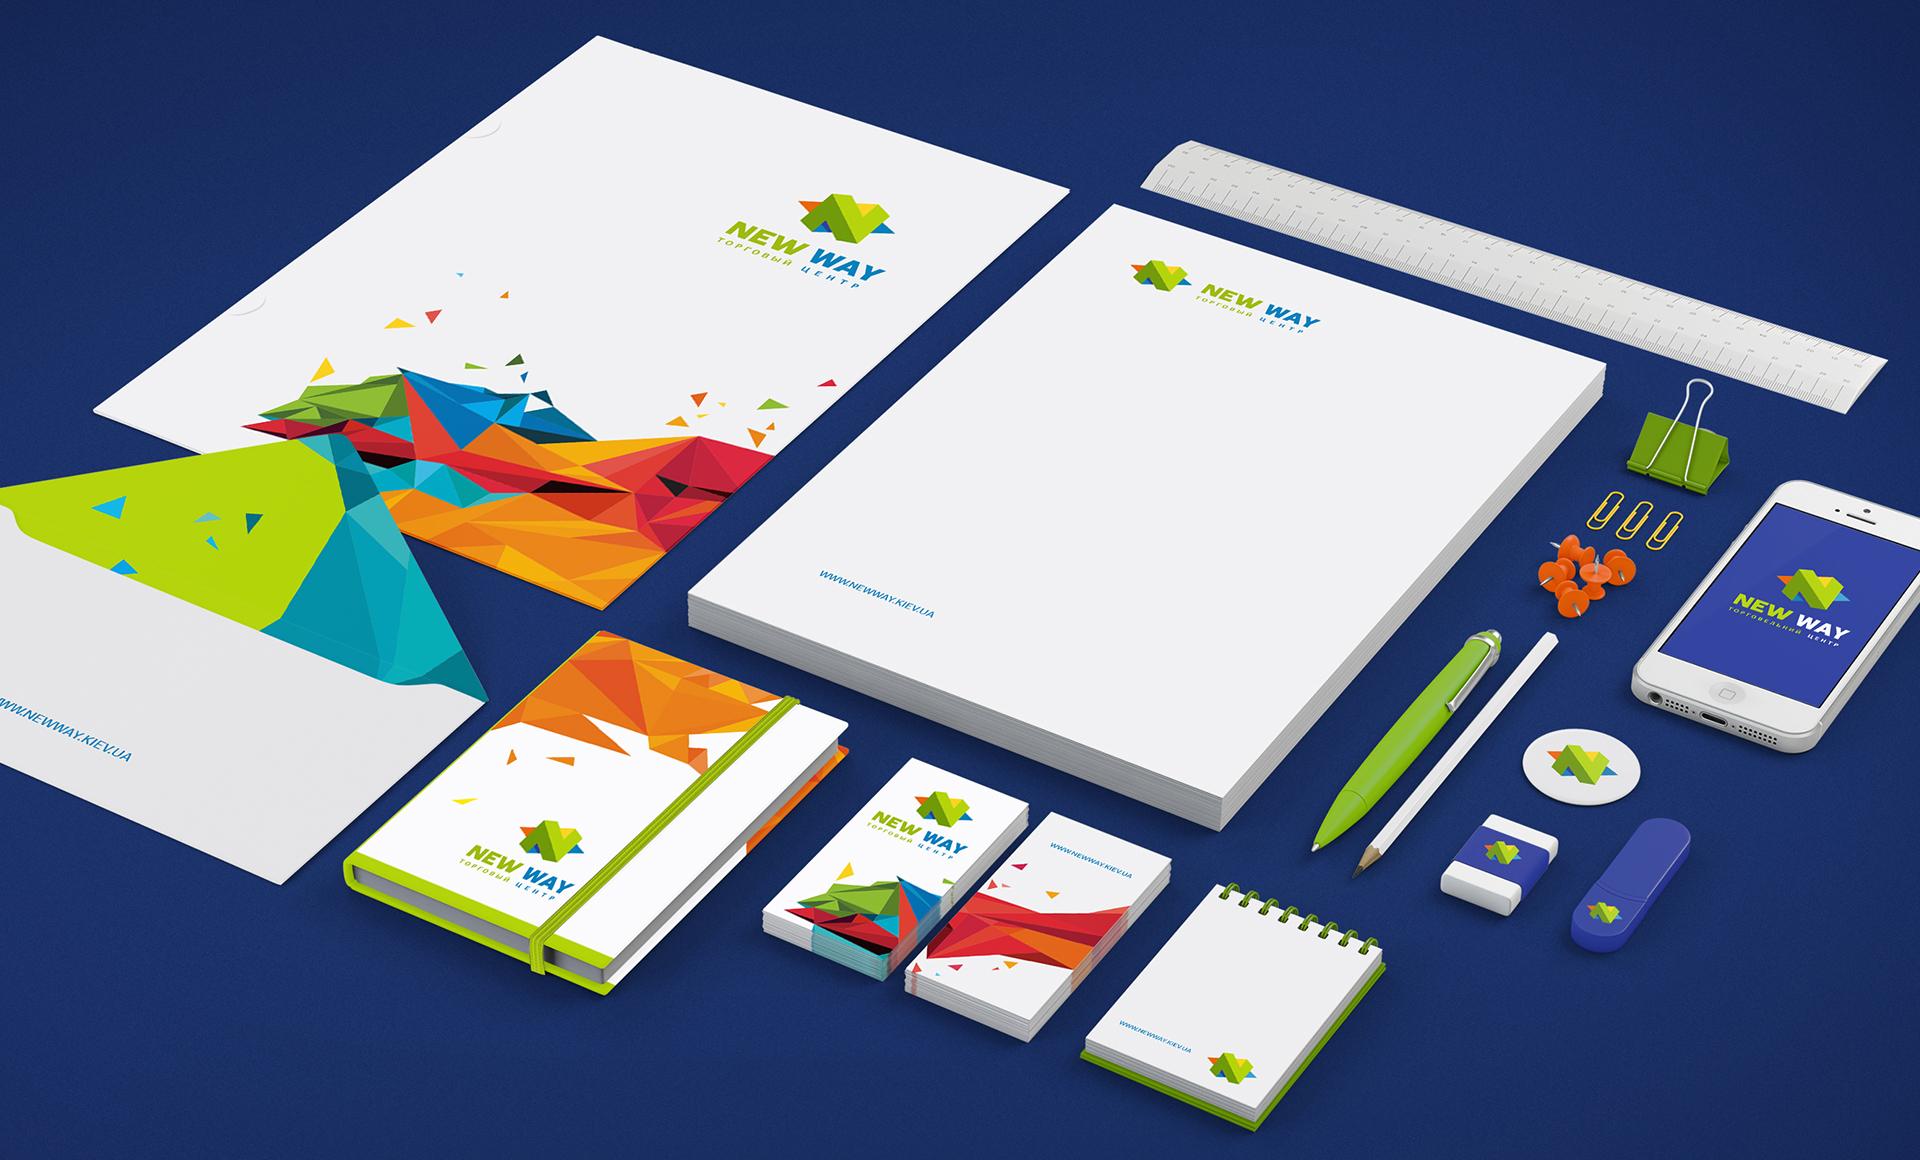 Design of the corporate identity of the shopping center